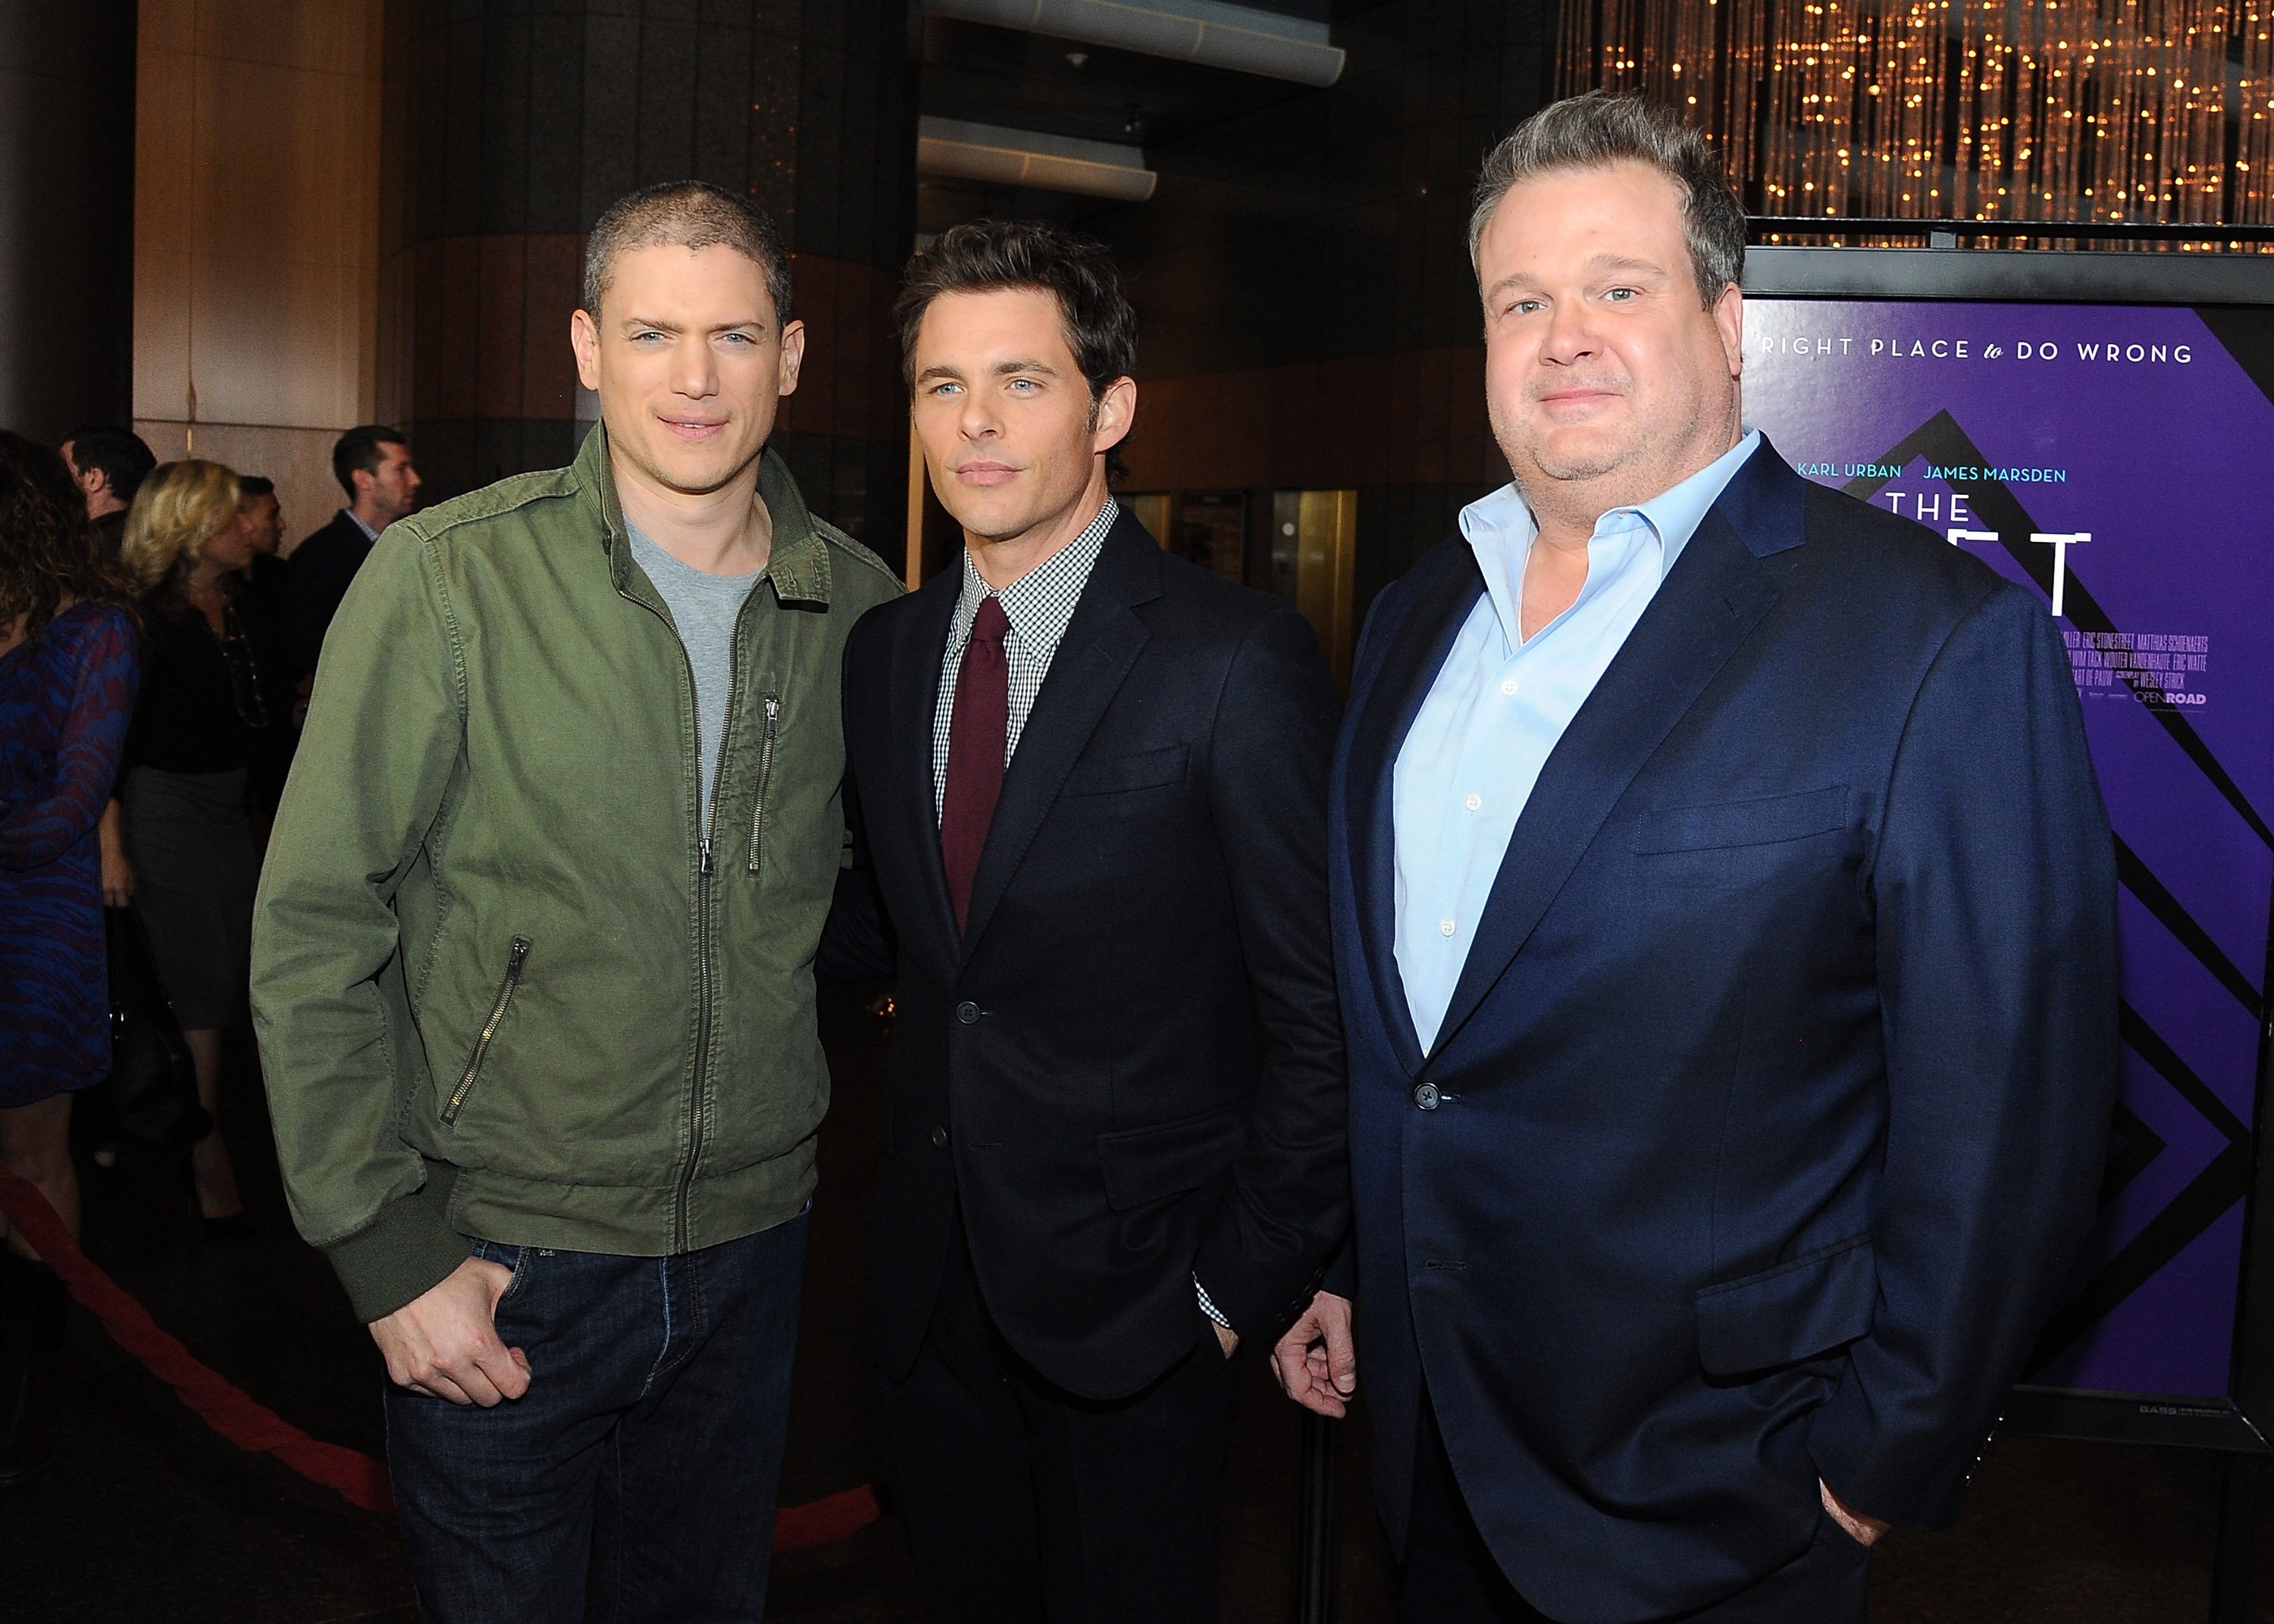  Actors Wentworth Miller, James Marsden and Eric Stonestreet à Los Angeles, le 27 janvier 2015. (Angela Weiss/Getty Images)